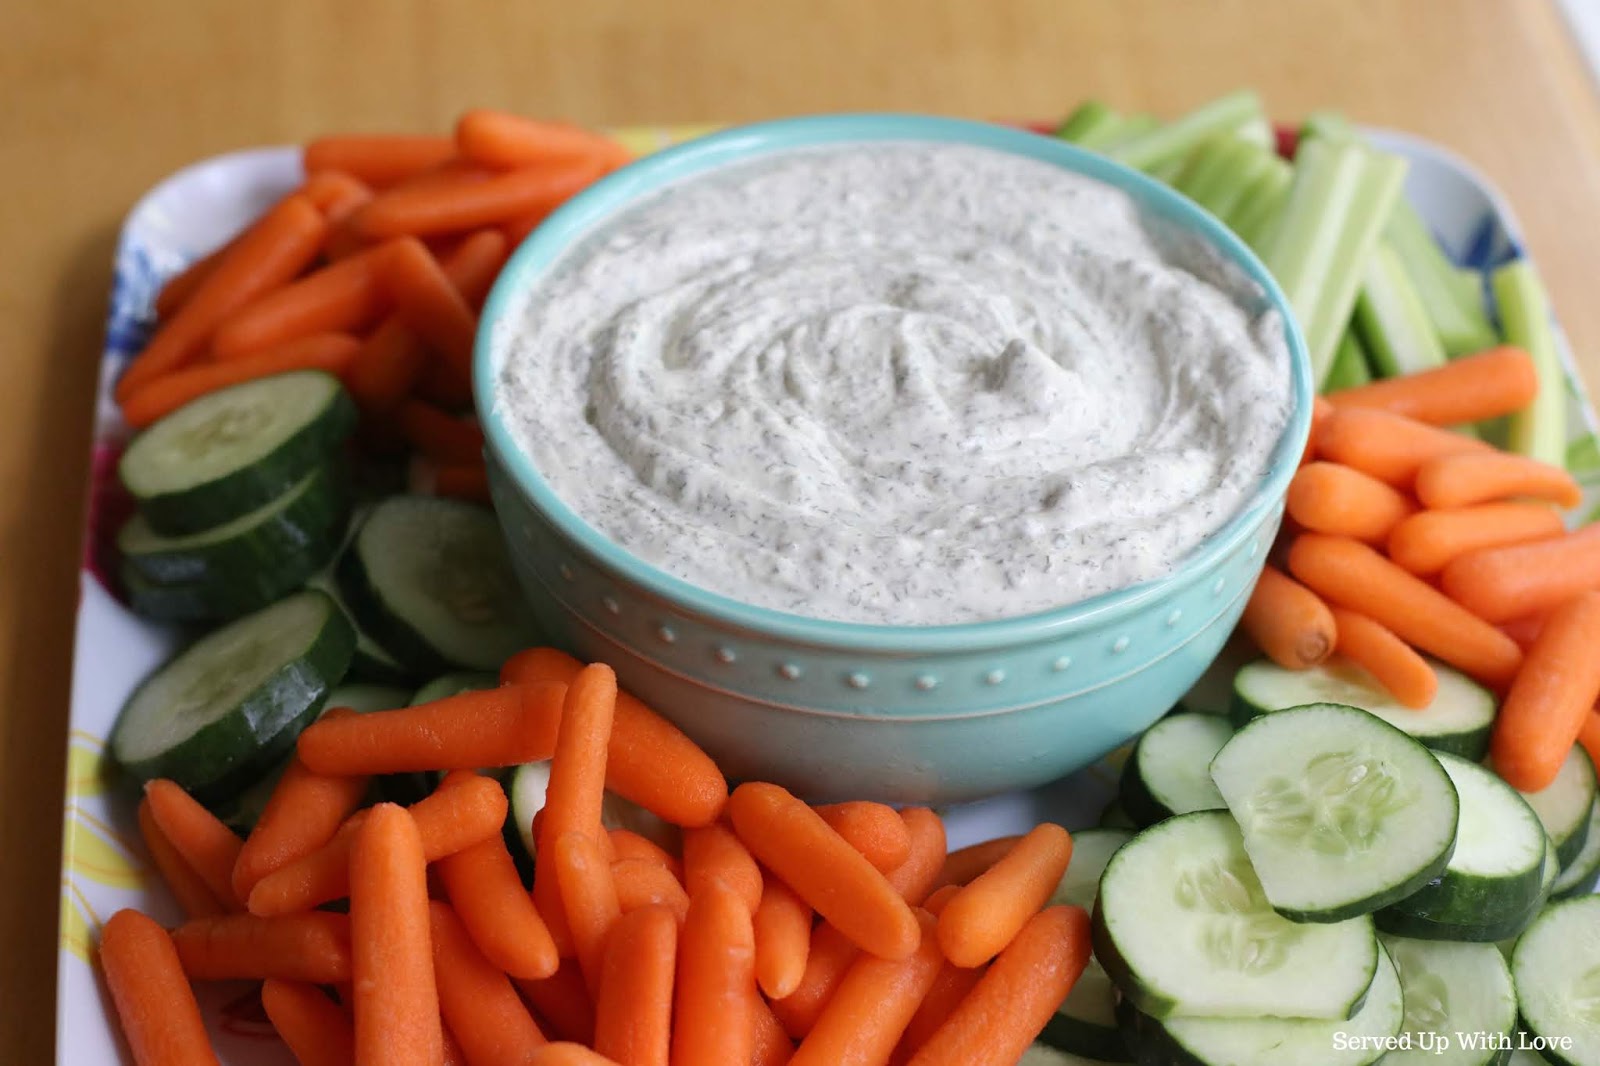 Served Up With Love: Garden Fresh Dill Dip